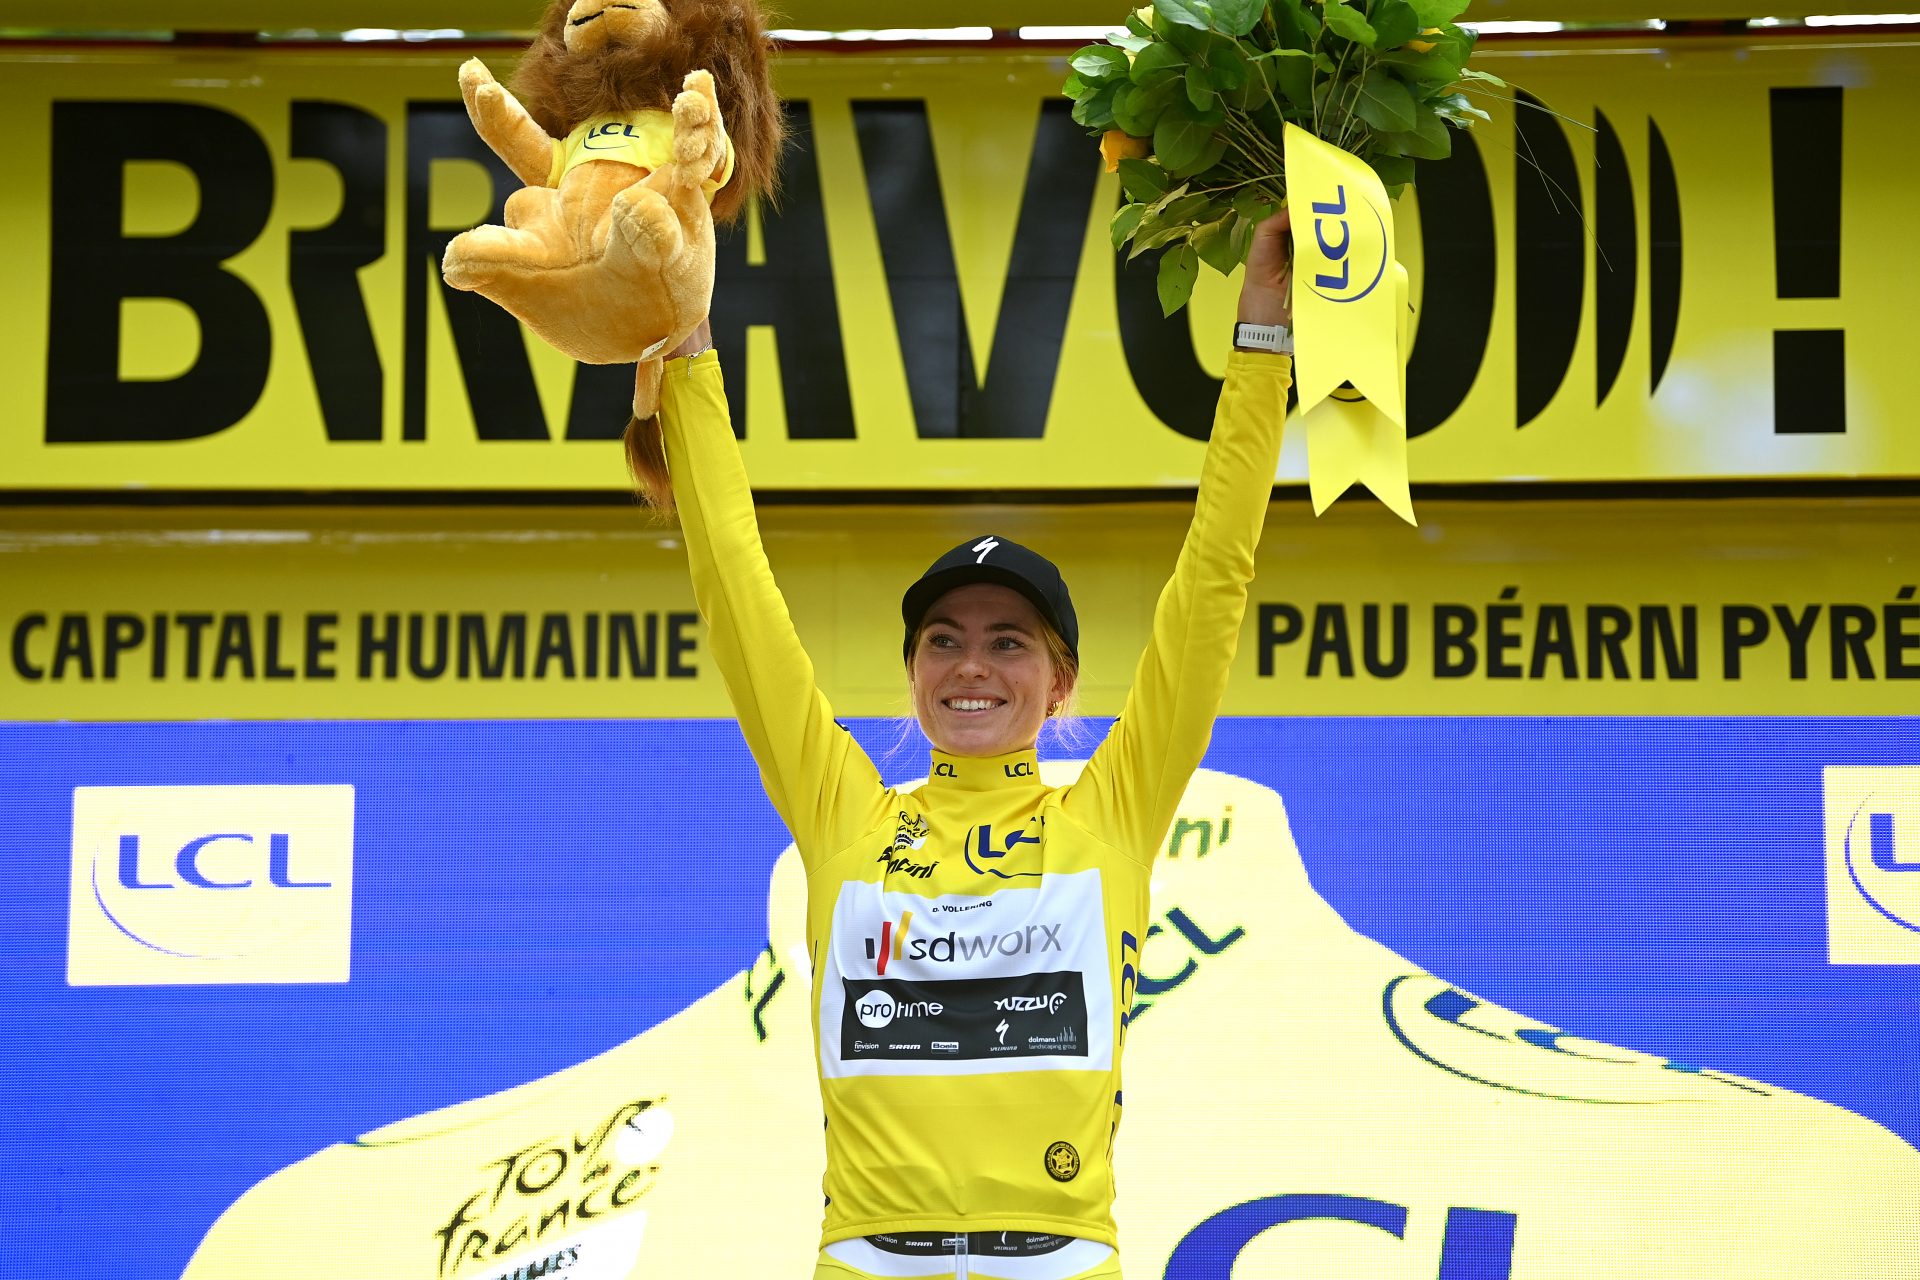 Demi Vollering kickstarts a new era in women’s cycling after Tour de France victory